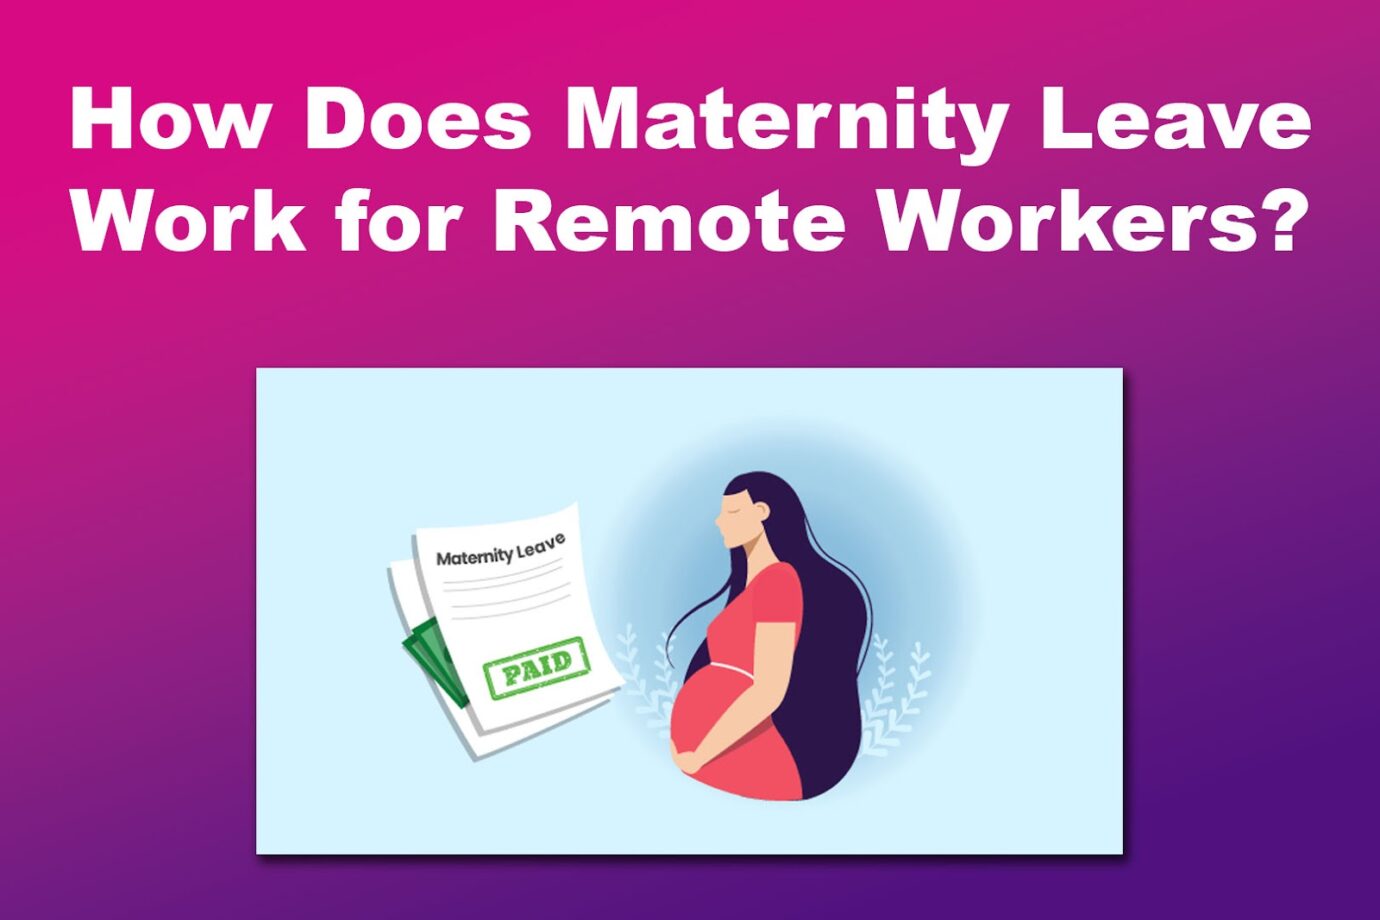 How Does Maternity Leave Work for Remote Workers?